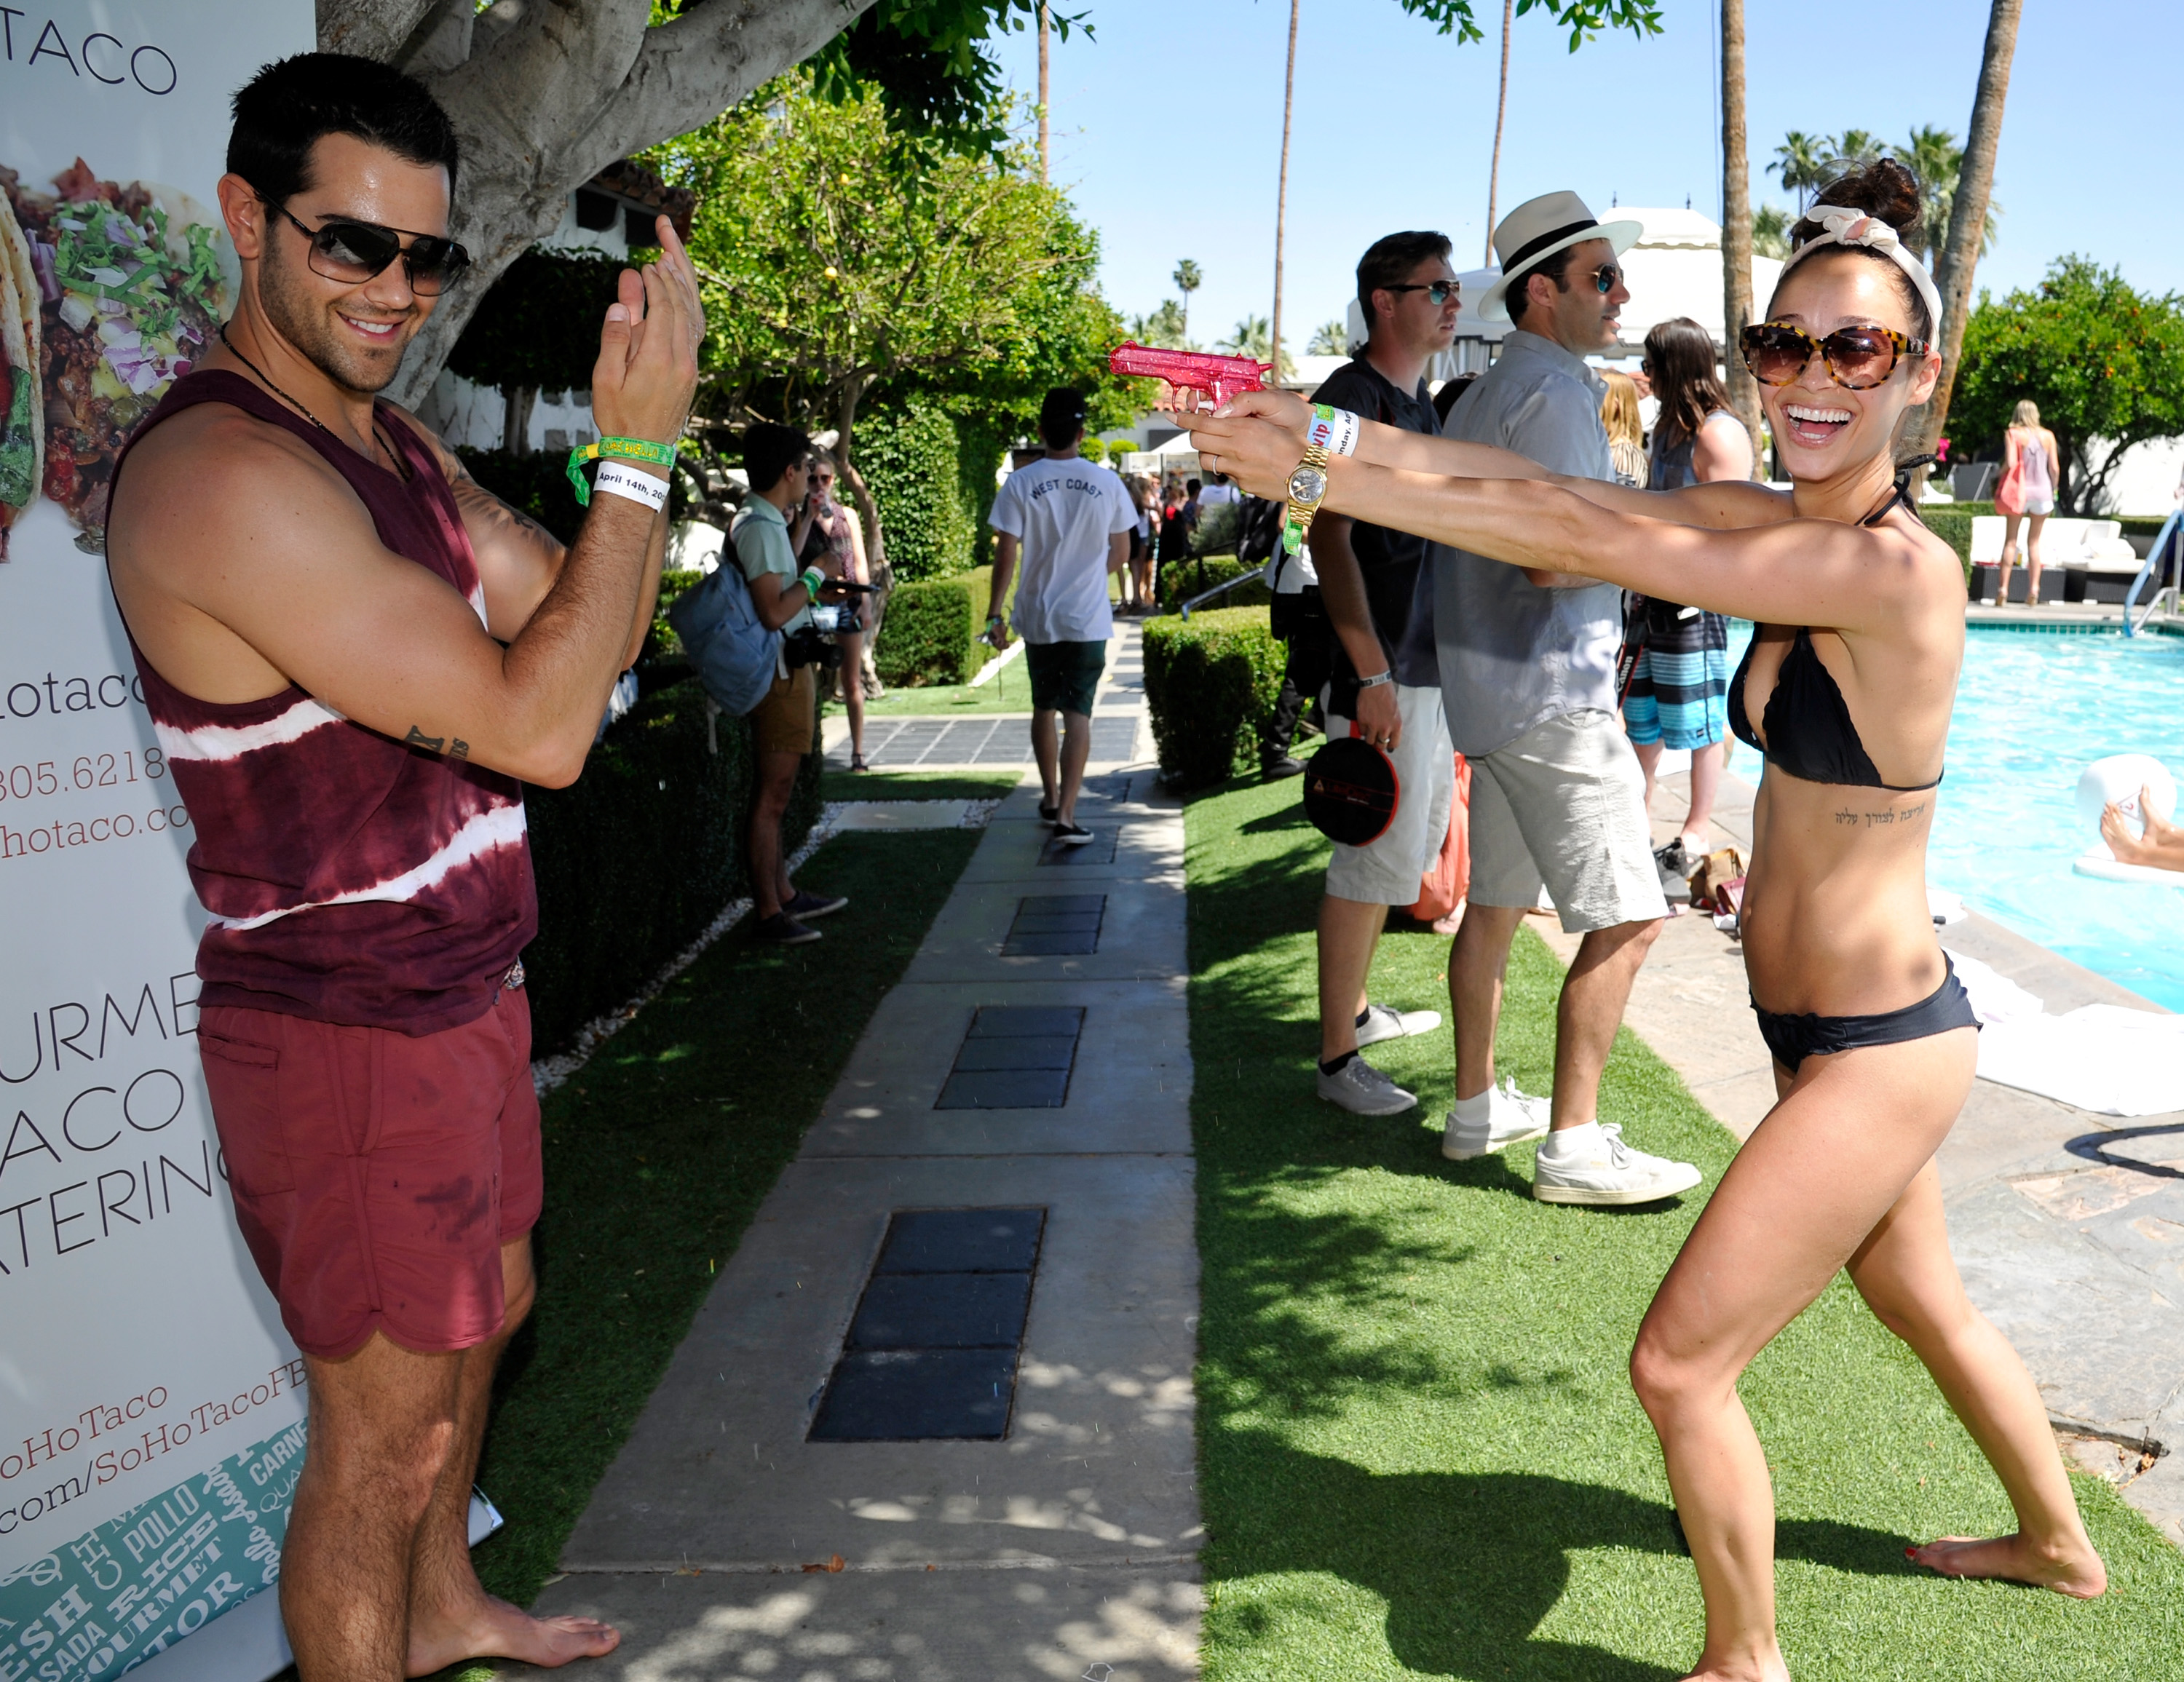 PALM SPRINGS, CA - APRIL 14: Cara Santana and Jesse Metcalfe attend the GUESS Hotel pool party at the Viceroy Palm Springs on April 14, 2013 in Palm Springs, California. (Photo by John Sciulli/Getty Images for GUESS)